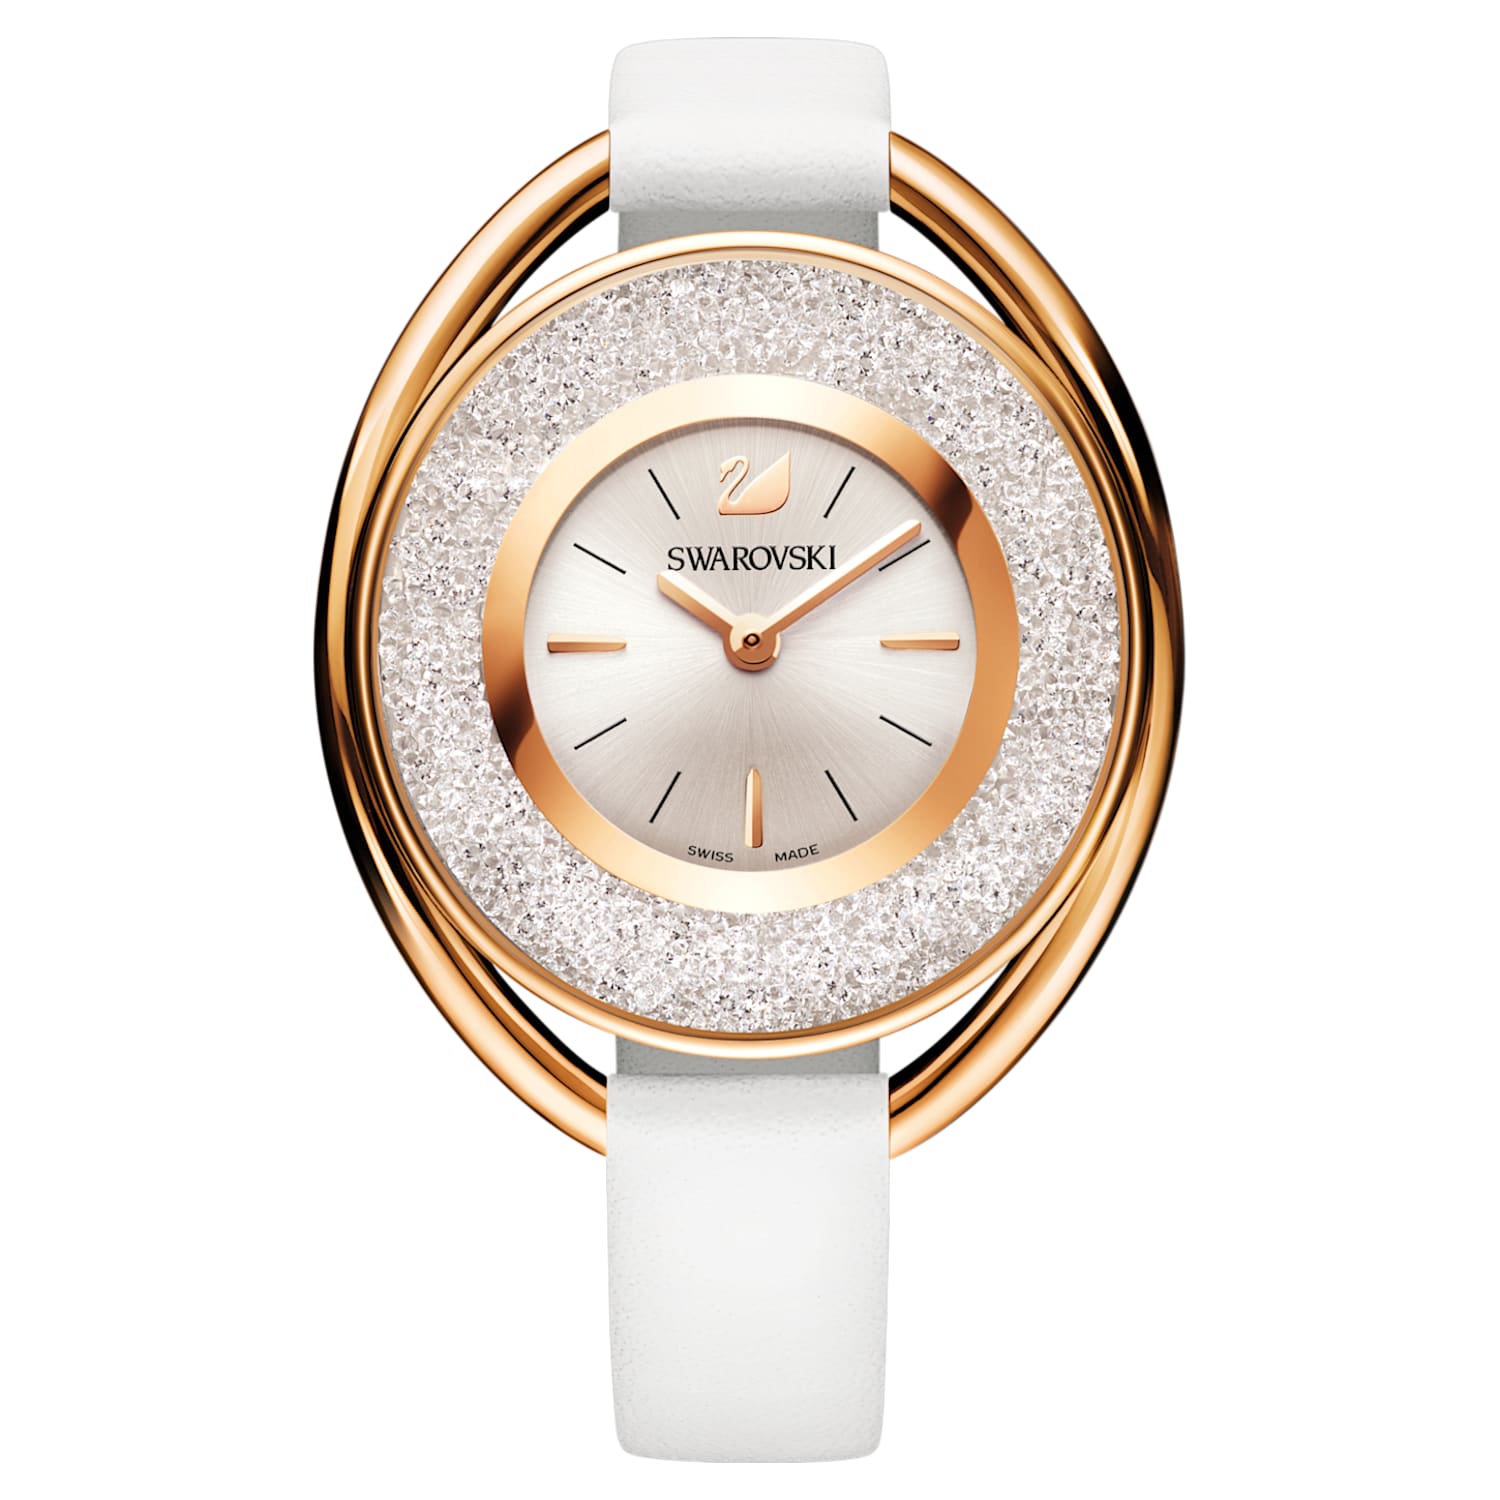 Crystalline Oval watch, Leather strap, White, Rose gold-tone finish